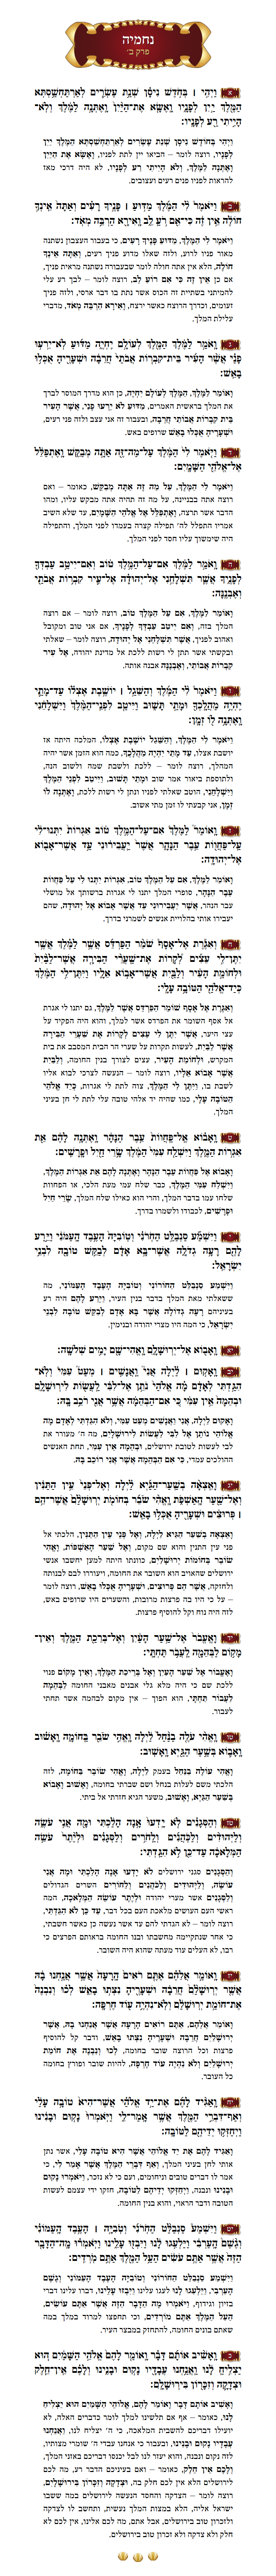 Nechemiah Chapter 2 with commentary